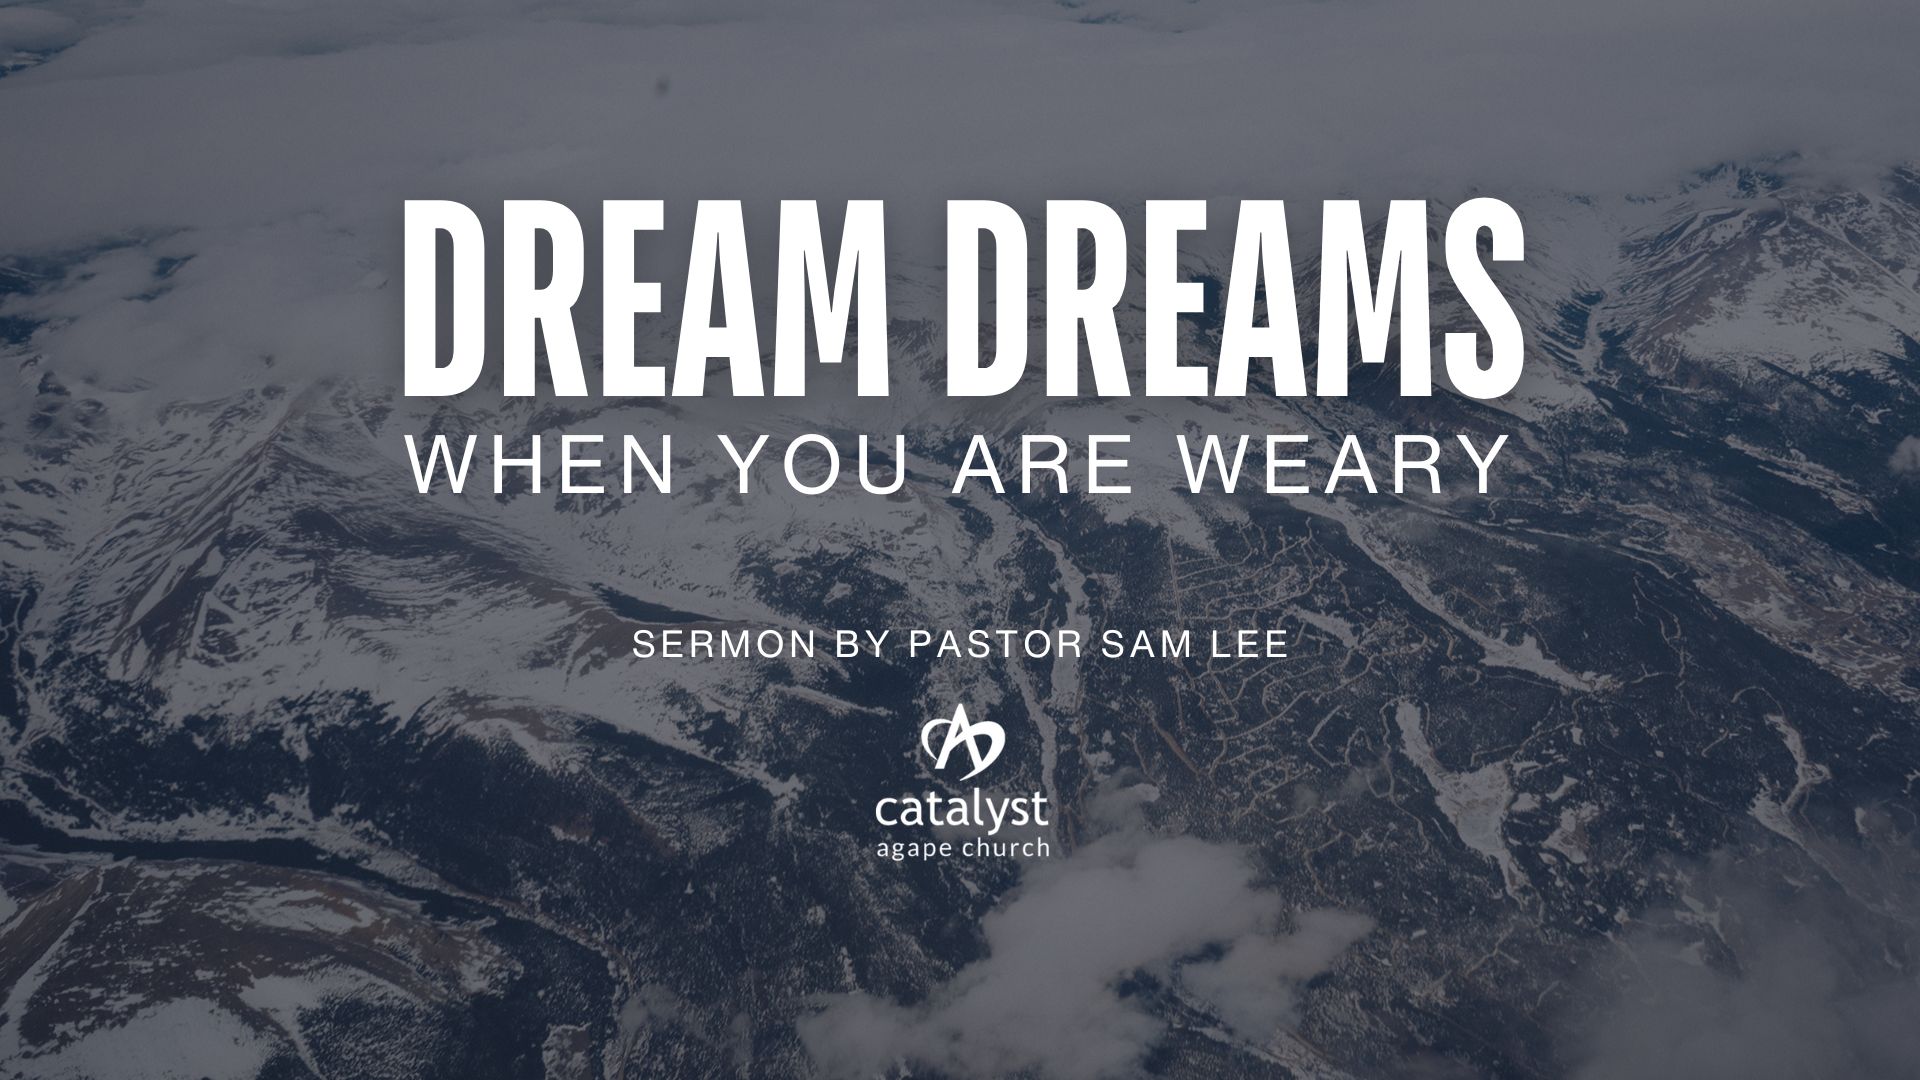 Dream Dreams: When You Are Weary